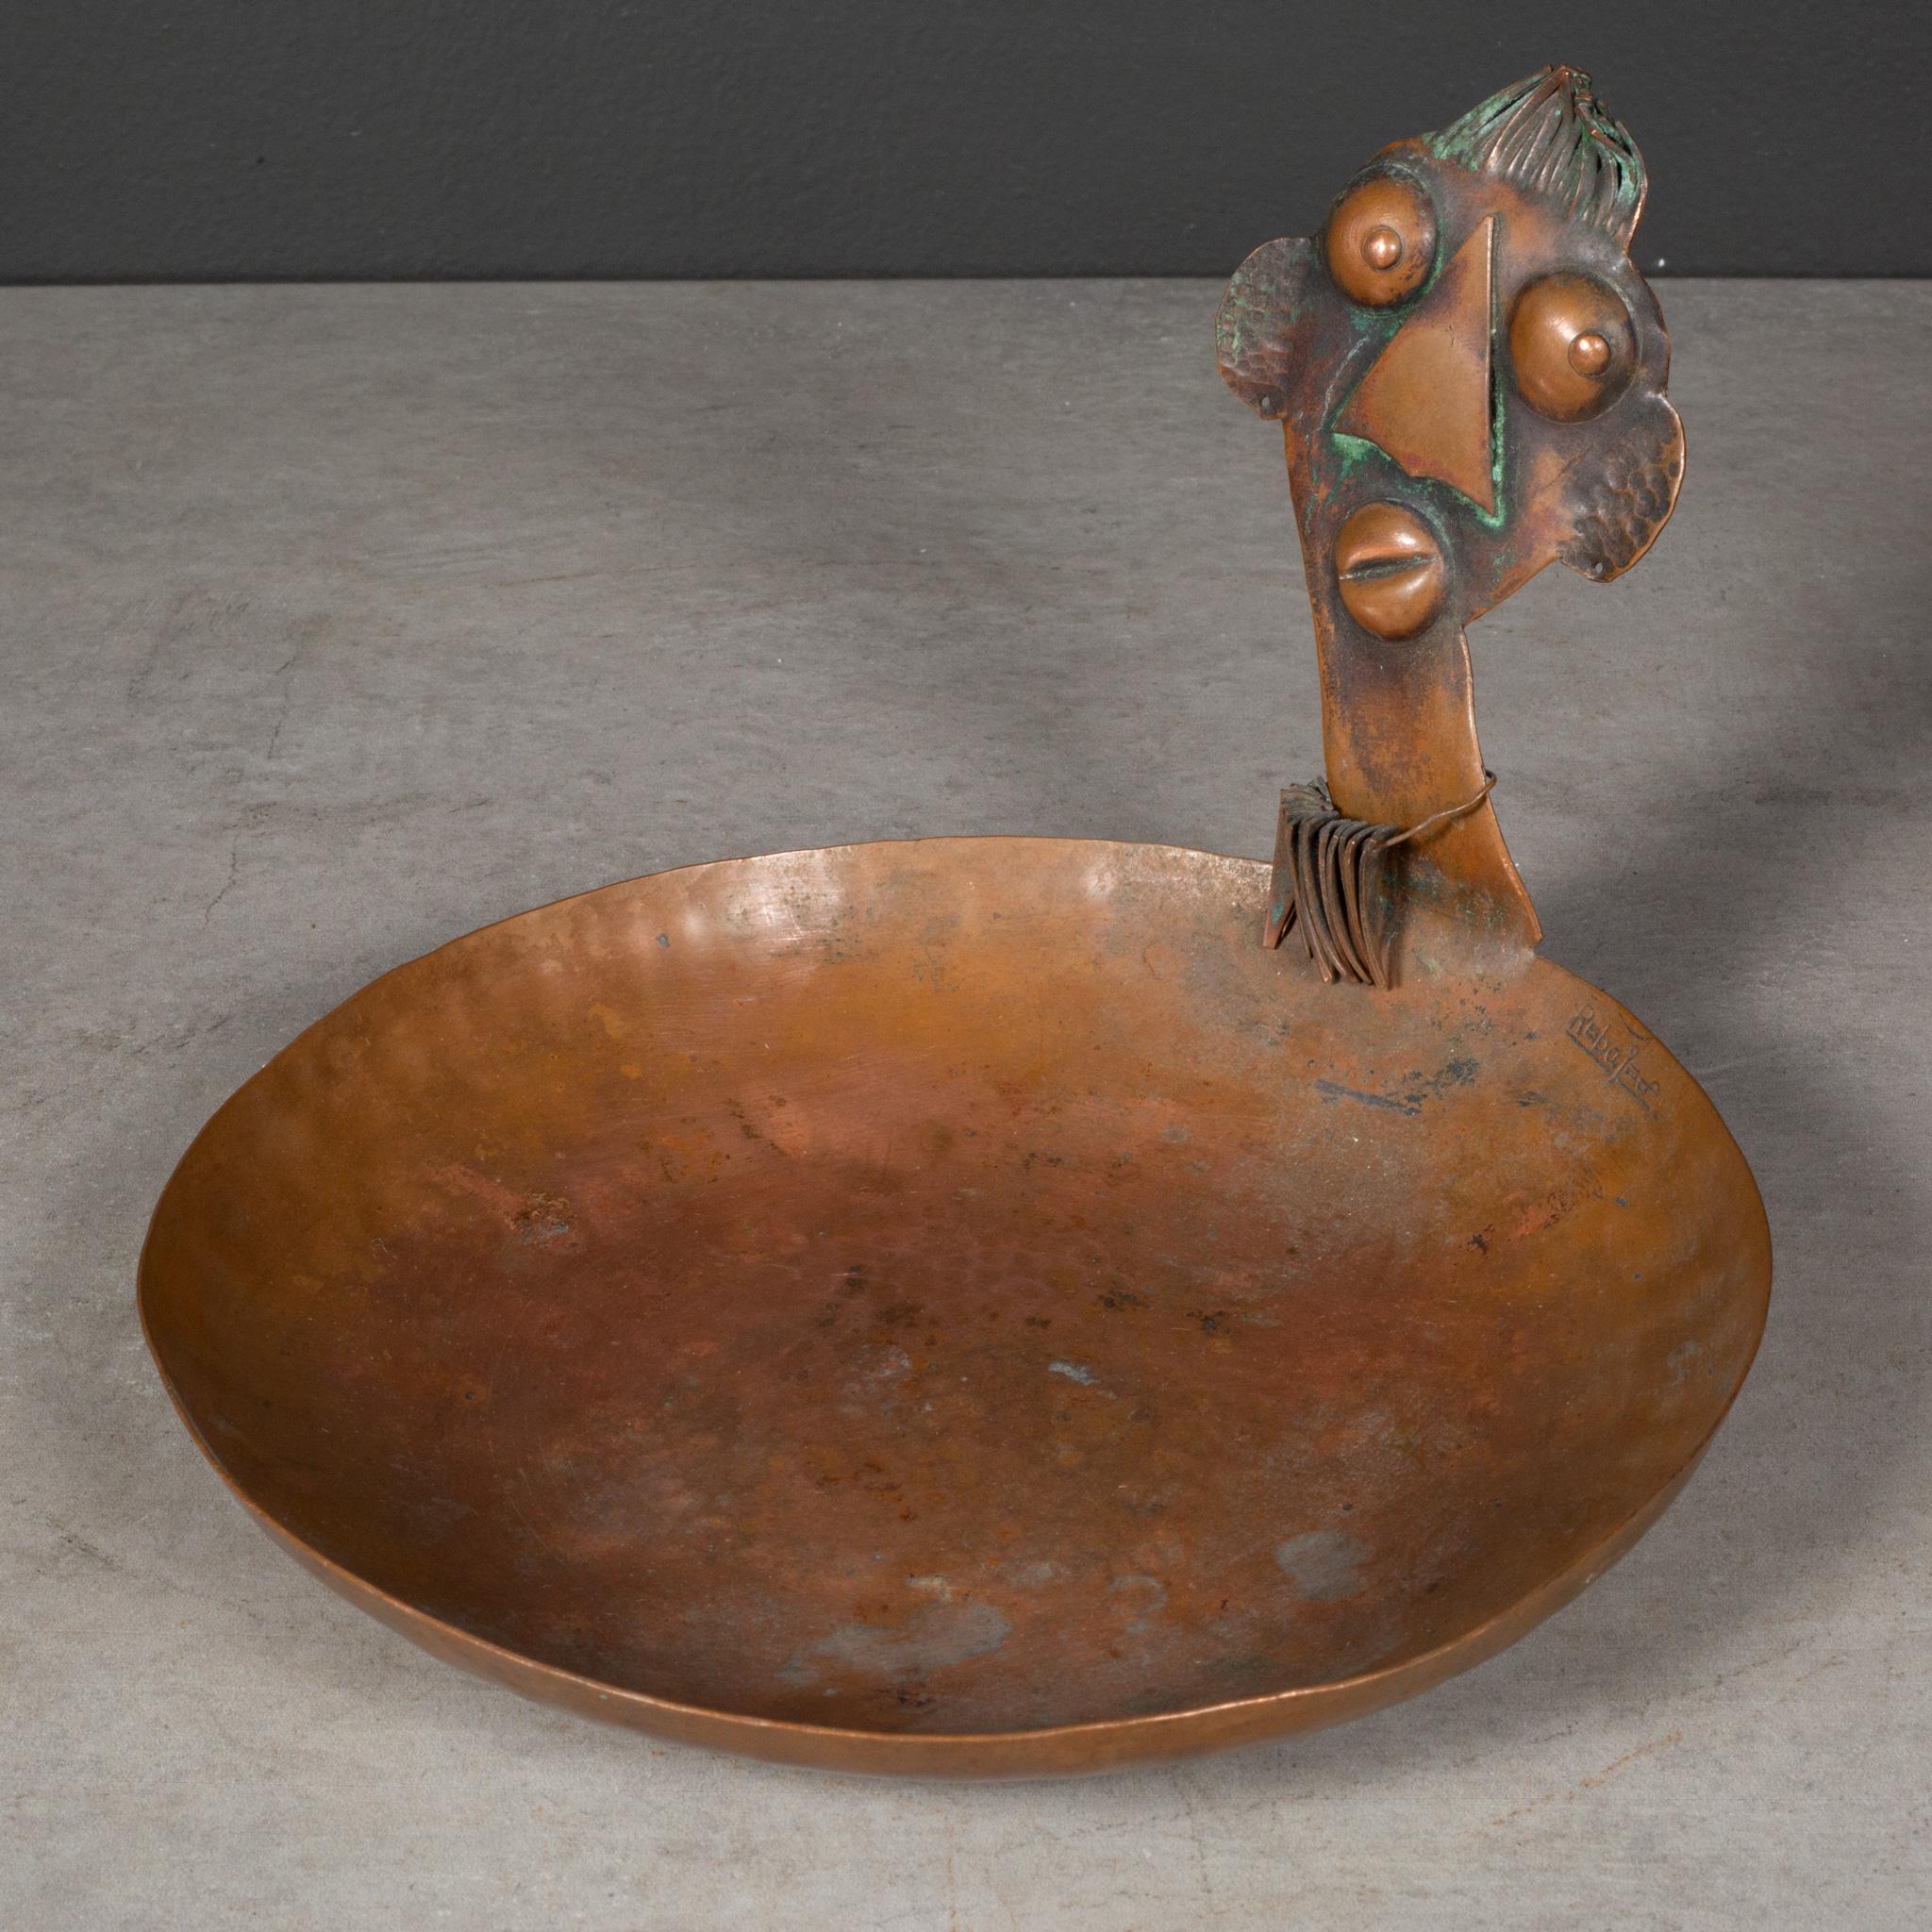 ABOUT

A mid-century copper trinket dish designed by Francisco Rebajes using his iconic African Ubangi tribe member and necklace motive. Stamped 